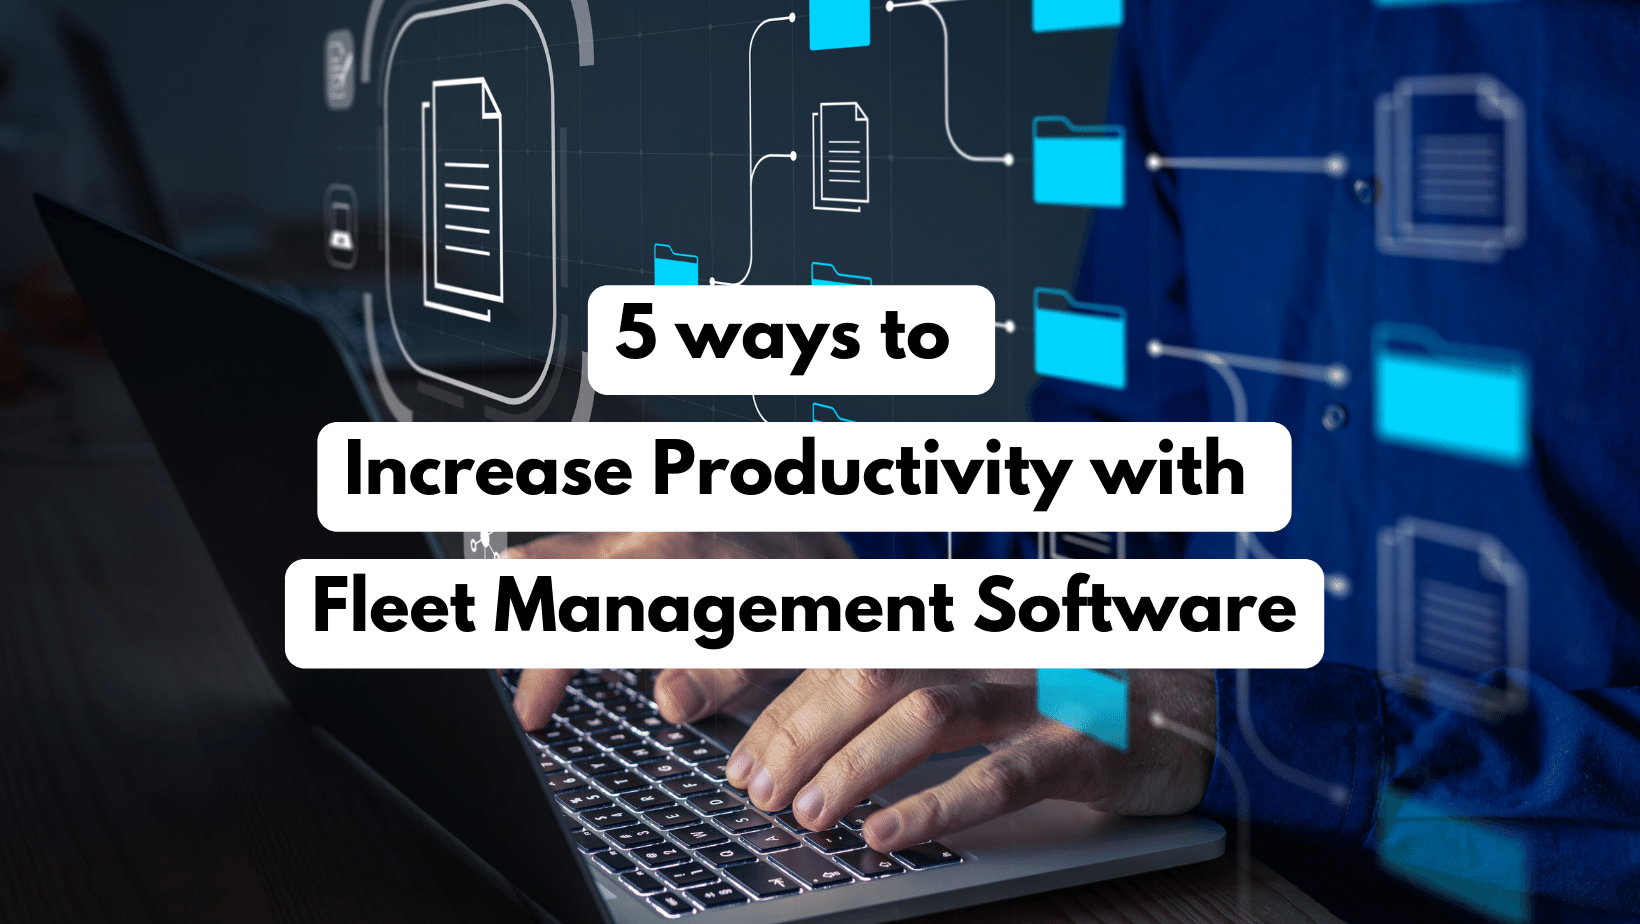 5 ways to Increase Productivity with Fleet Management Software